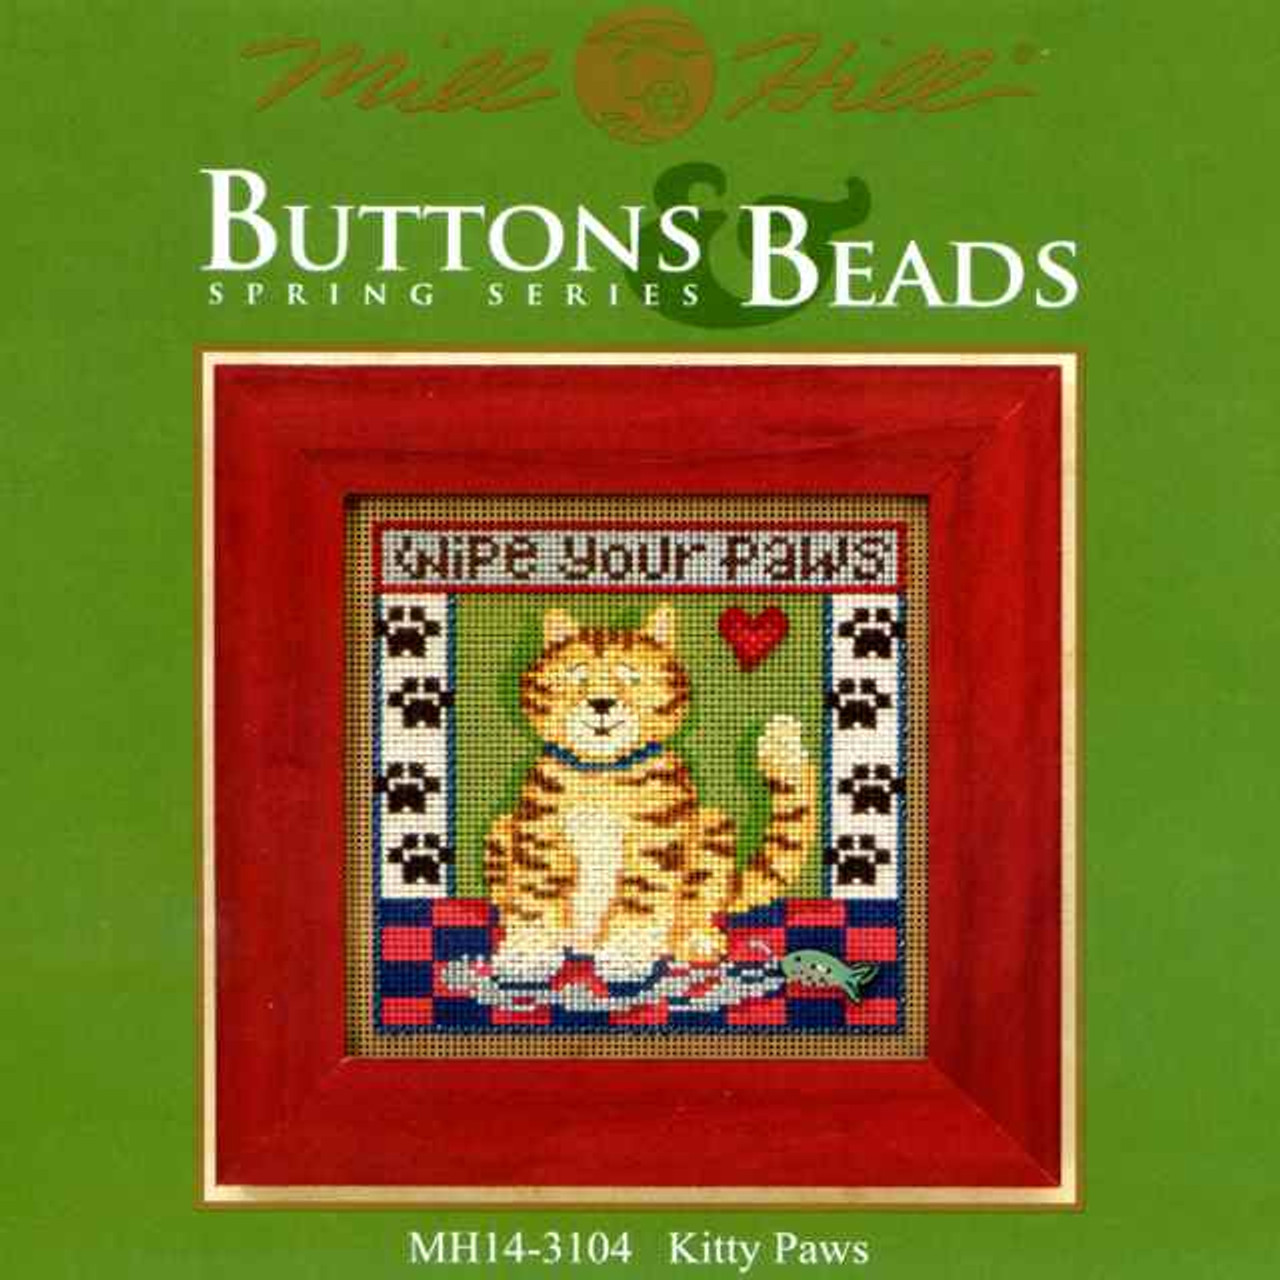 Kitty Paws Cross Stitch Kit Mill Hill 2013 Buttons & Beads Spring